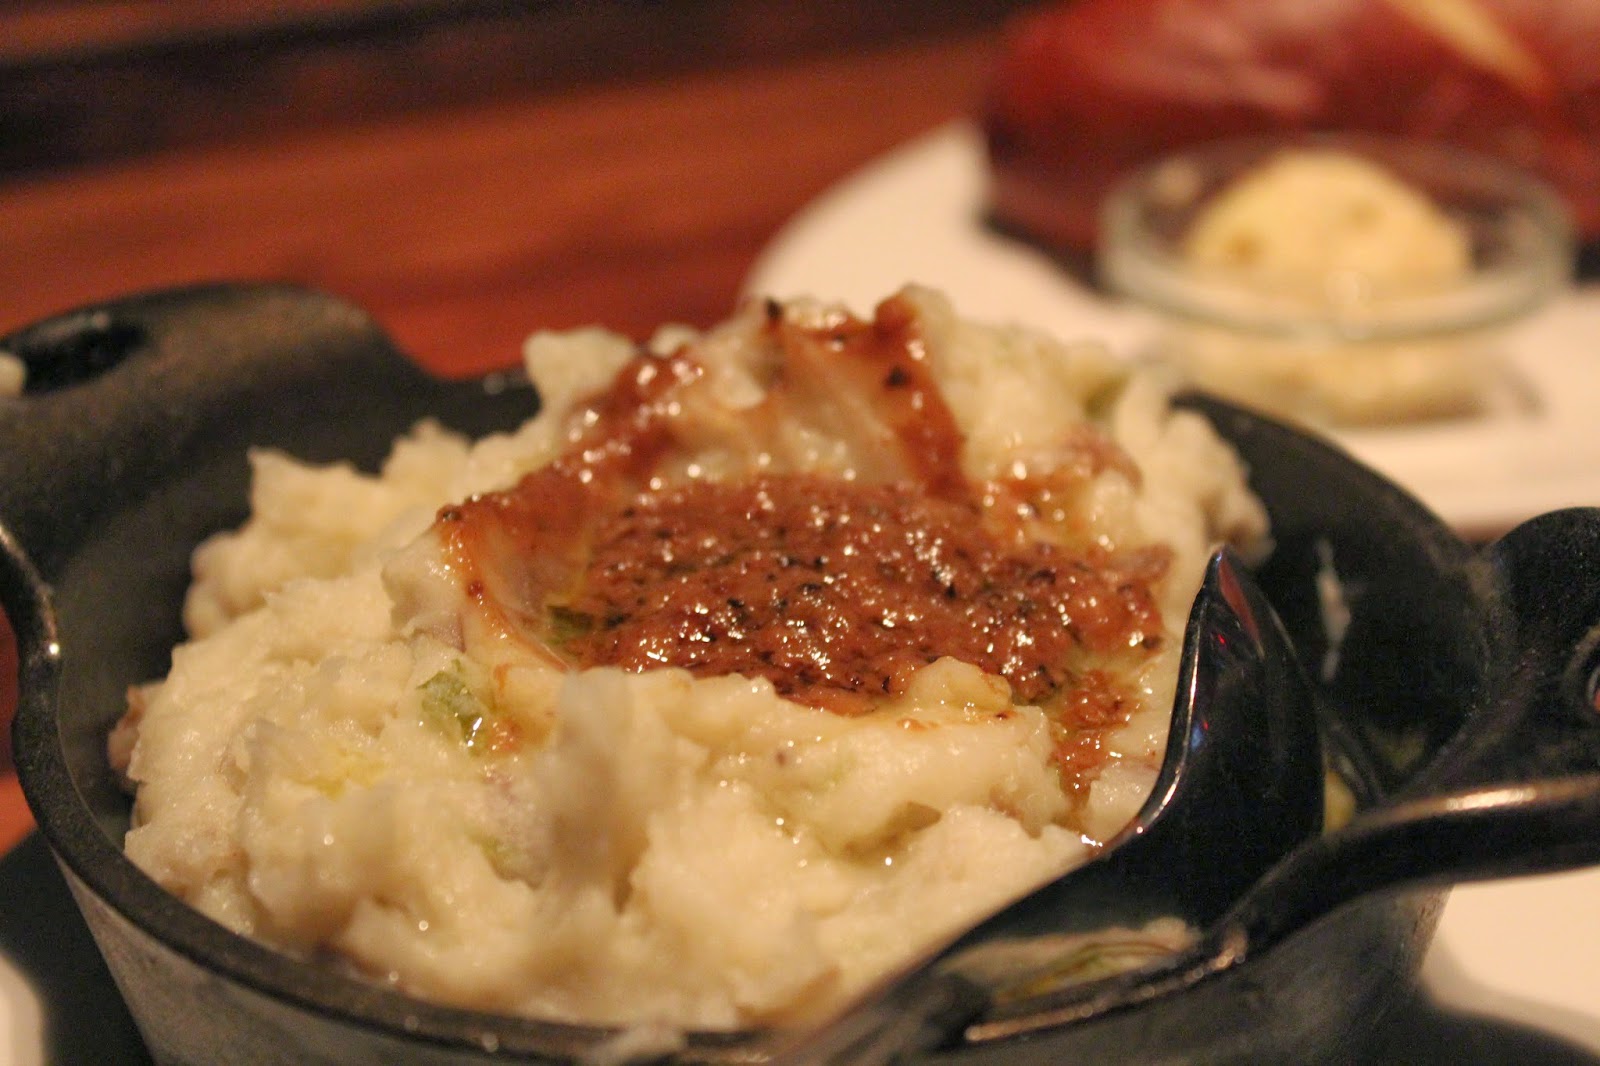 Garlic mashed potatoes at Del Frisco's Grille